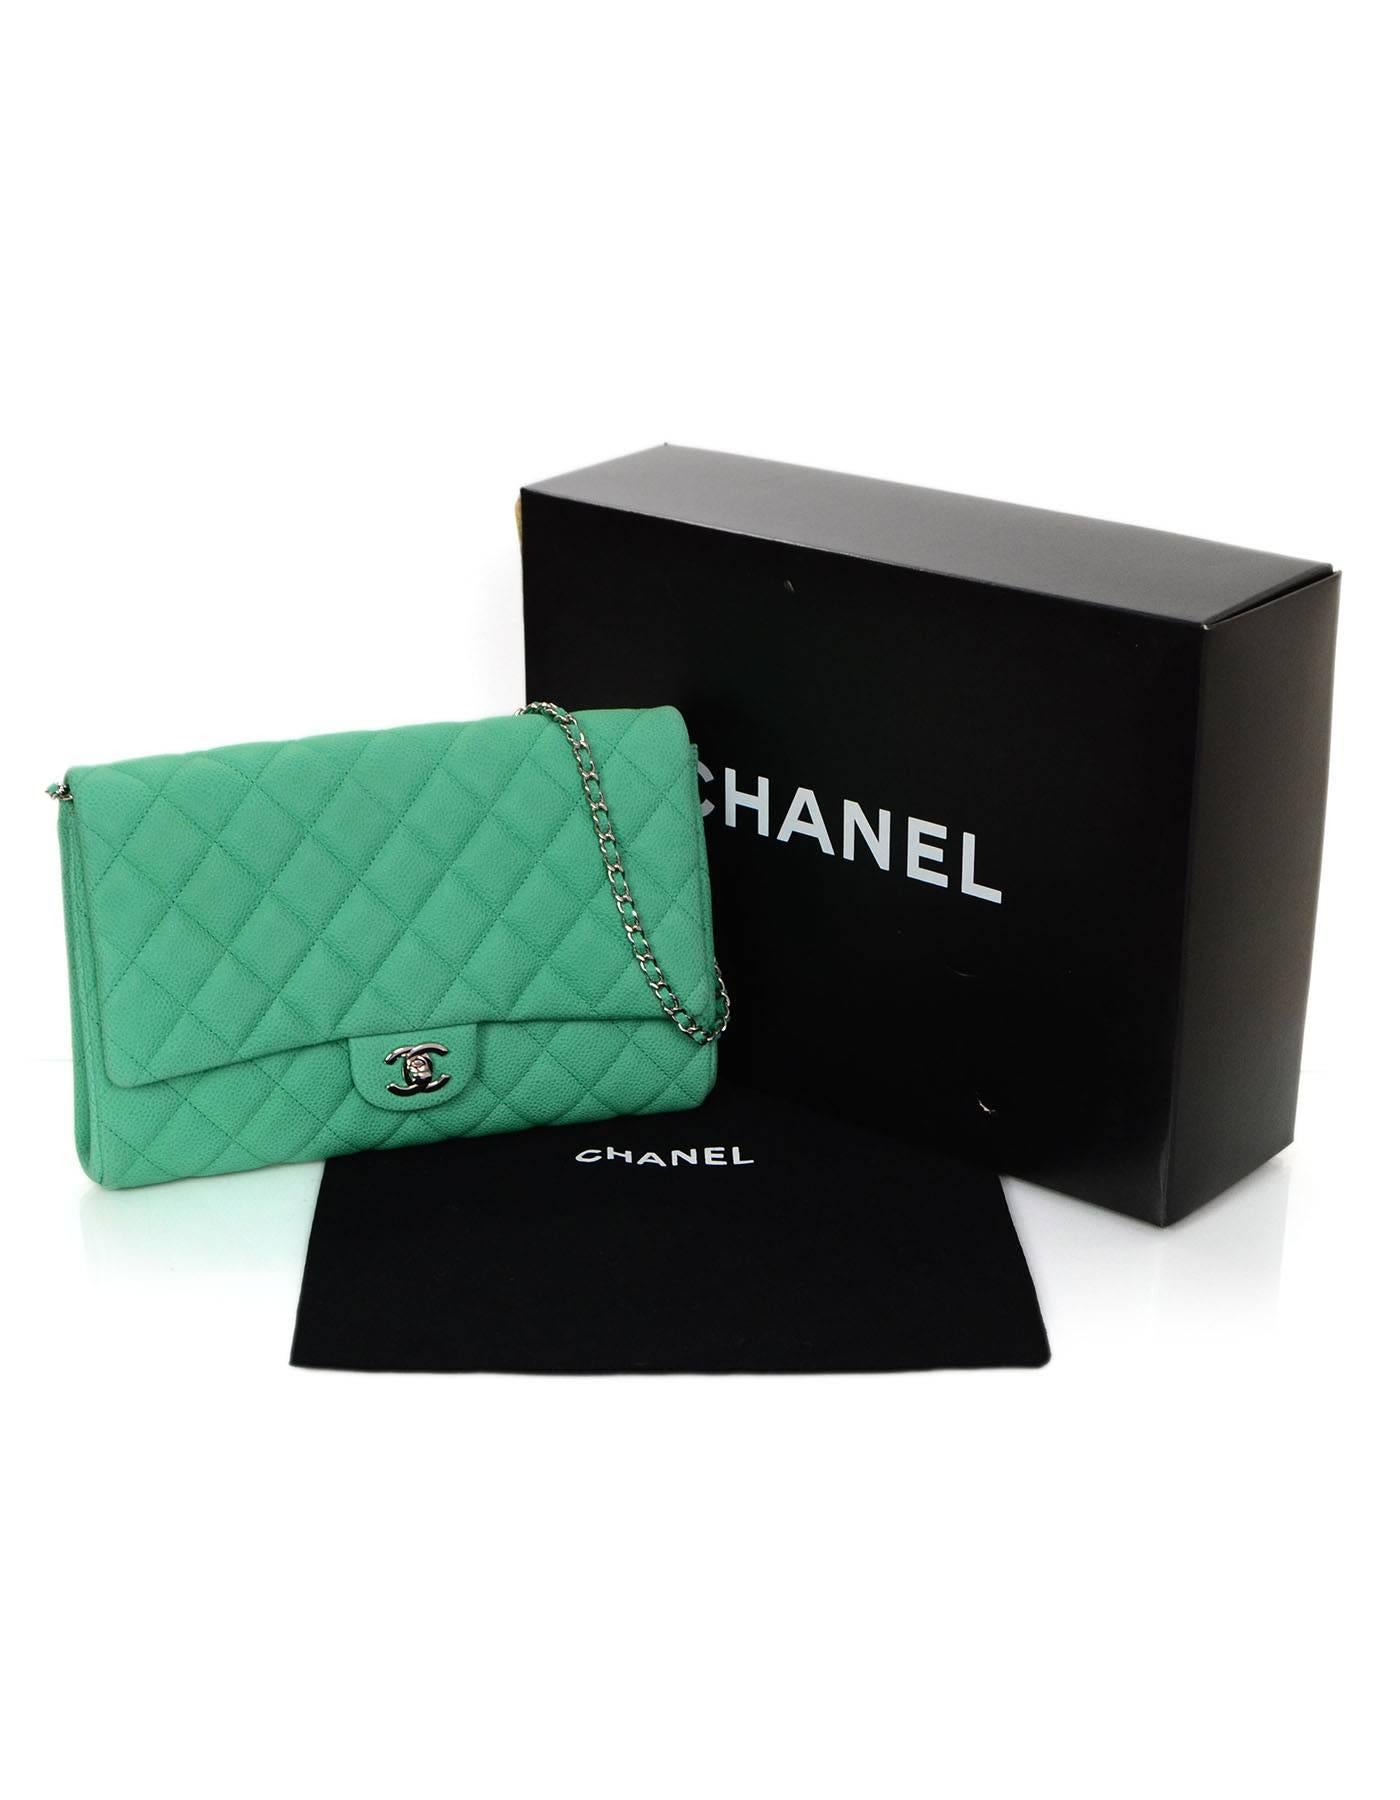 Chanel Seafoam Green Quilted Caviar Leather Timeless Clutch Bag CWC rt. $3, 100 3